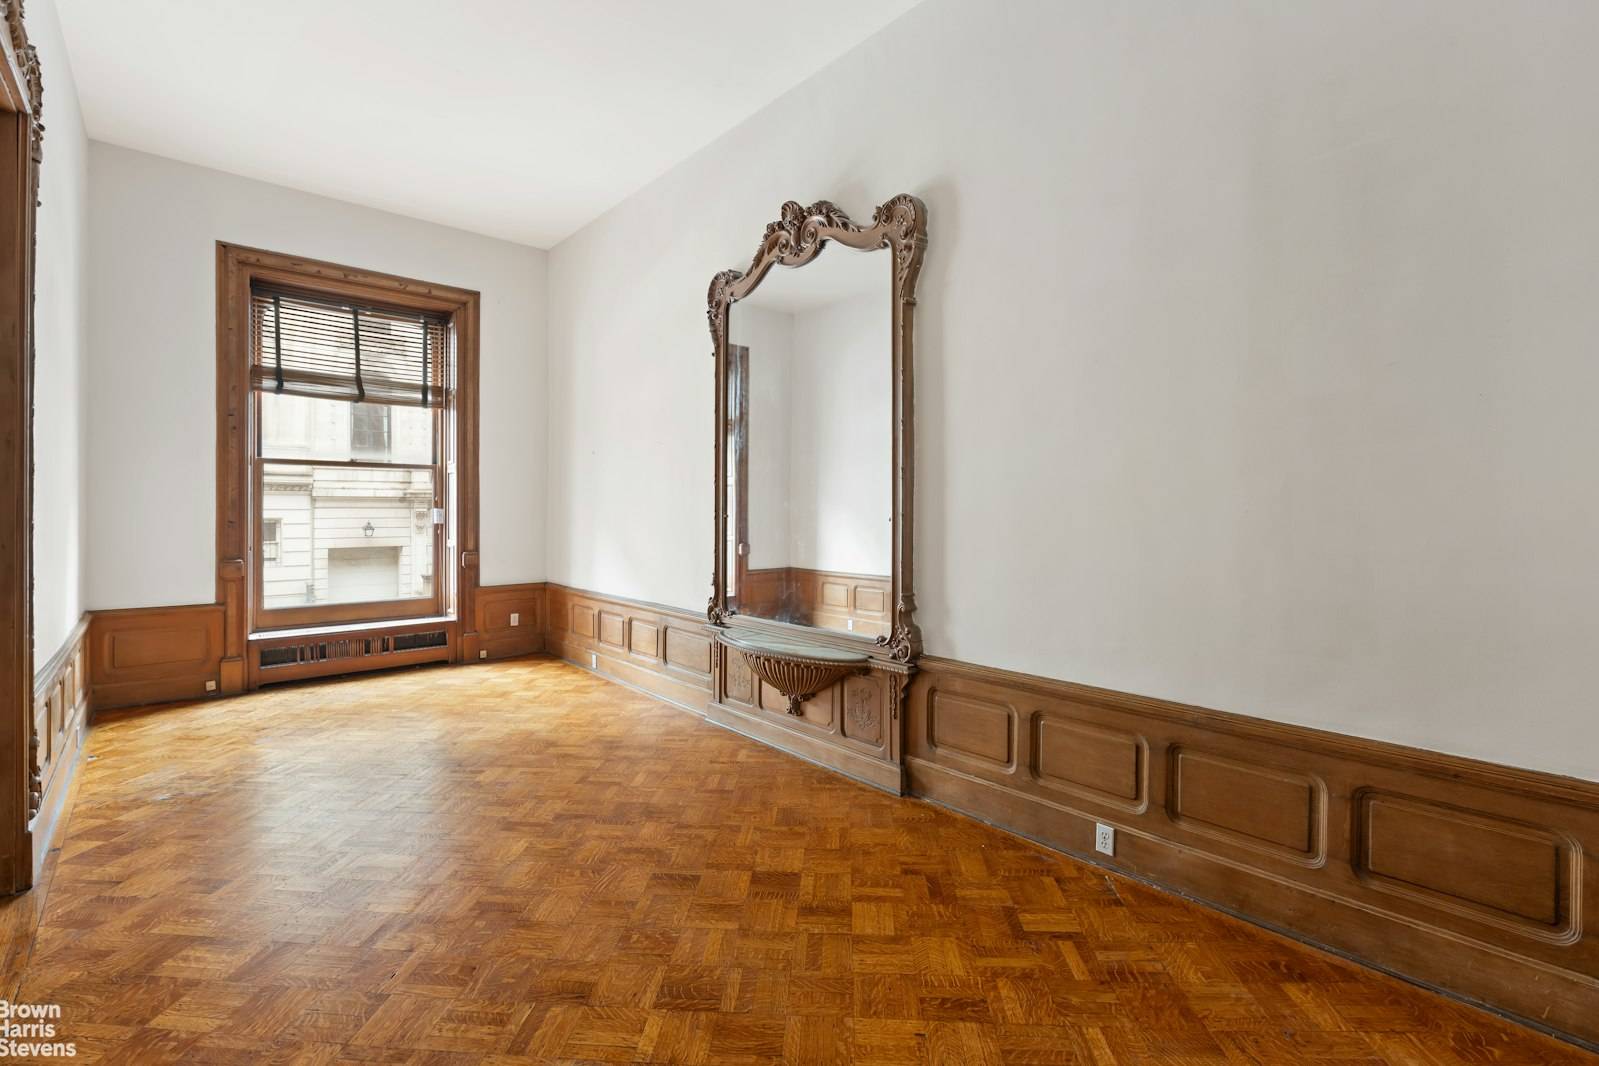 Welcome to Residence 2 at 16 East 63rd Street, an exquisite Upper East Side gem nestled on a Central Park block.